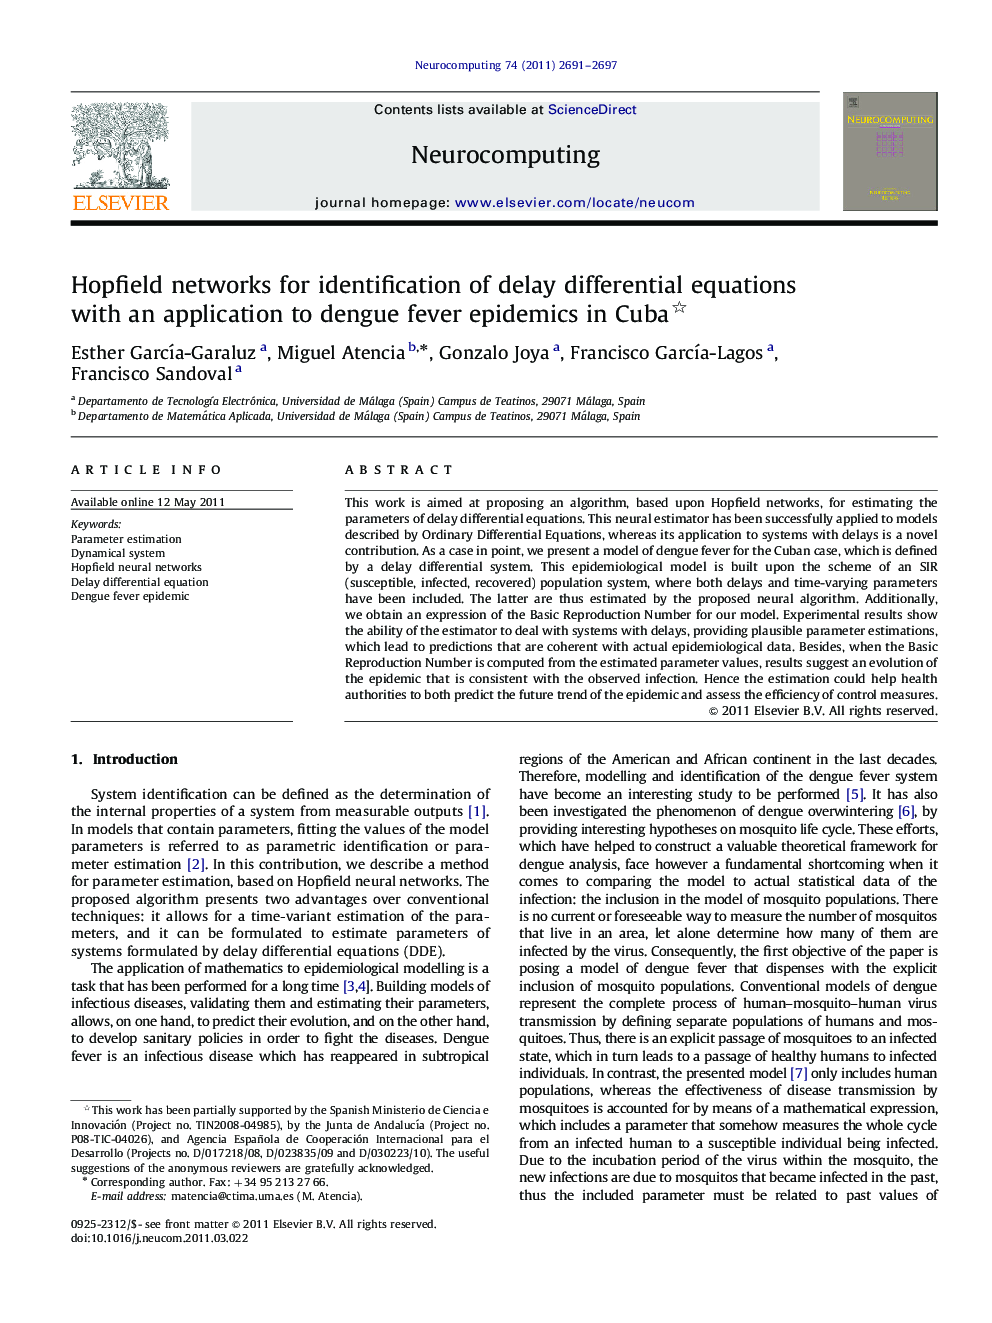 Hopfield networks for identification of delay differential equations with an application to dengue fever epidemics in Cuba 